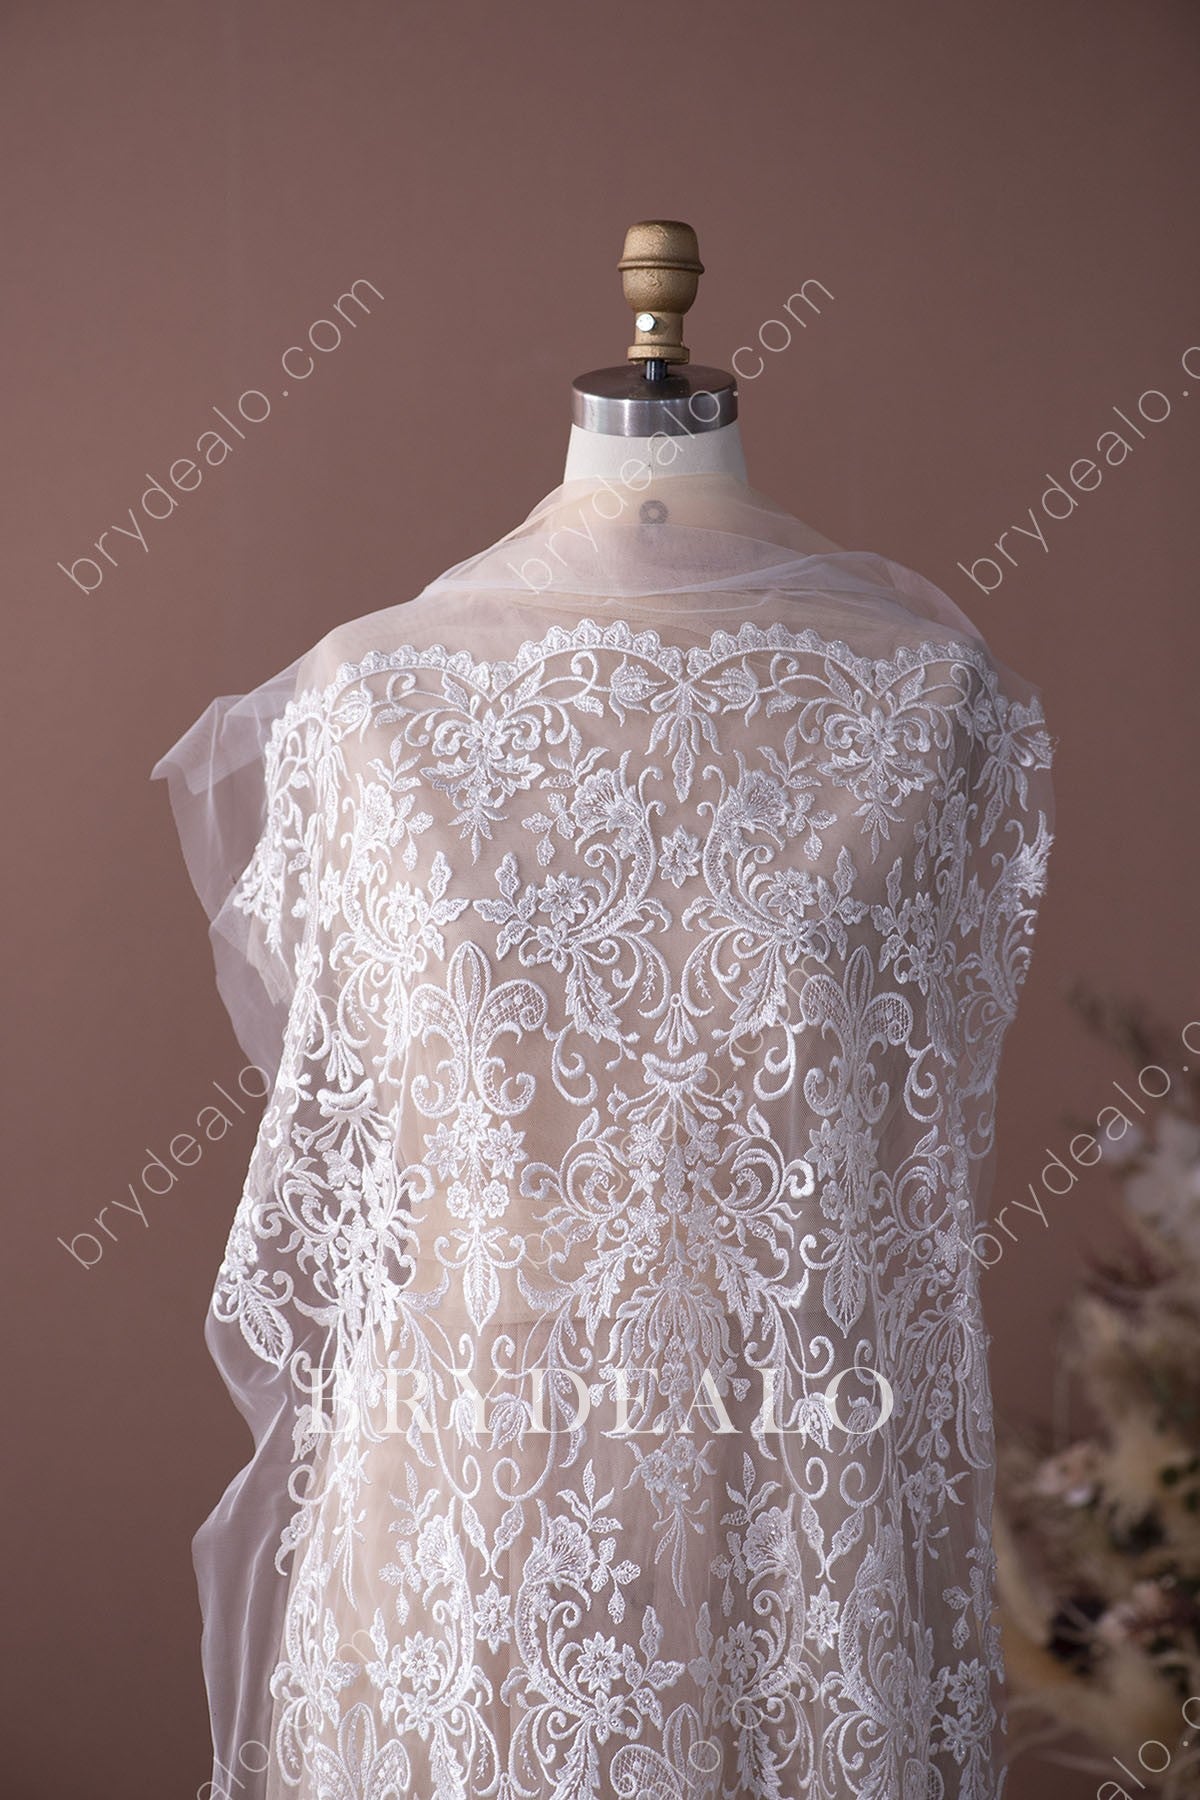 Bridal Dress Lace Fabric For Sale